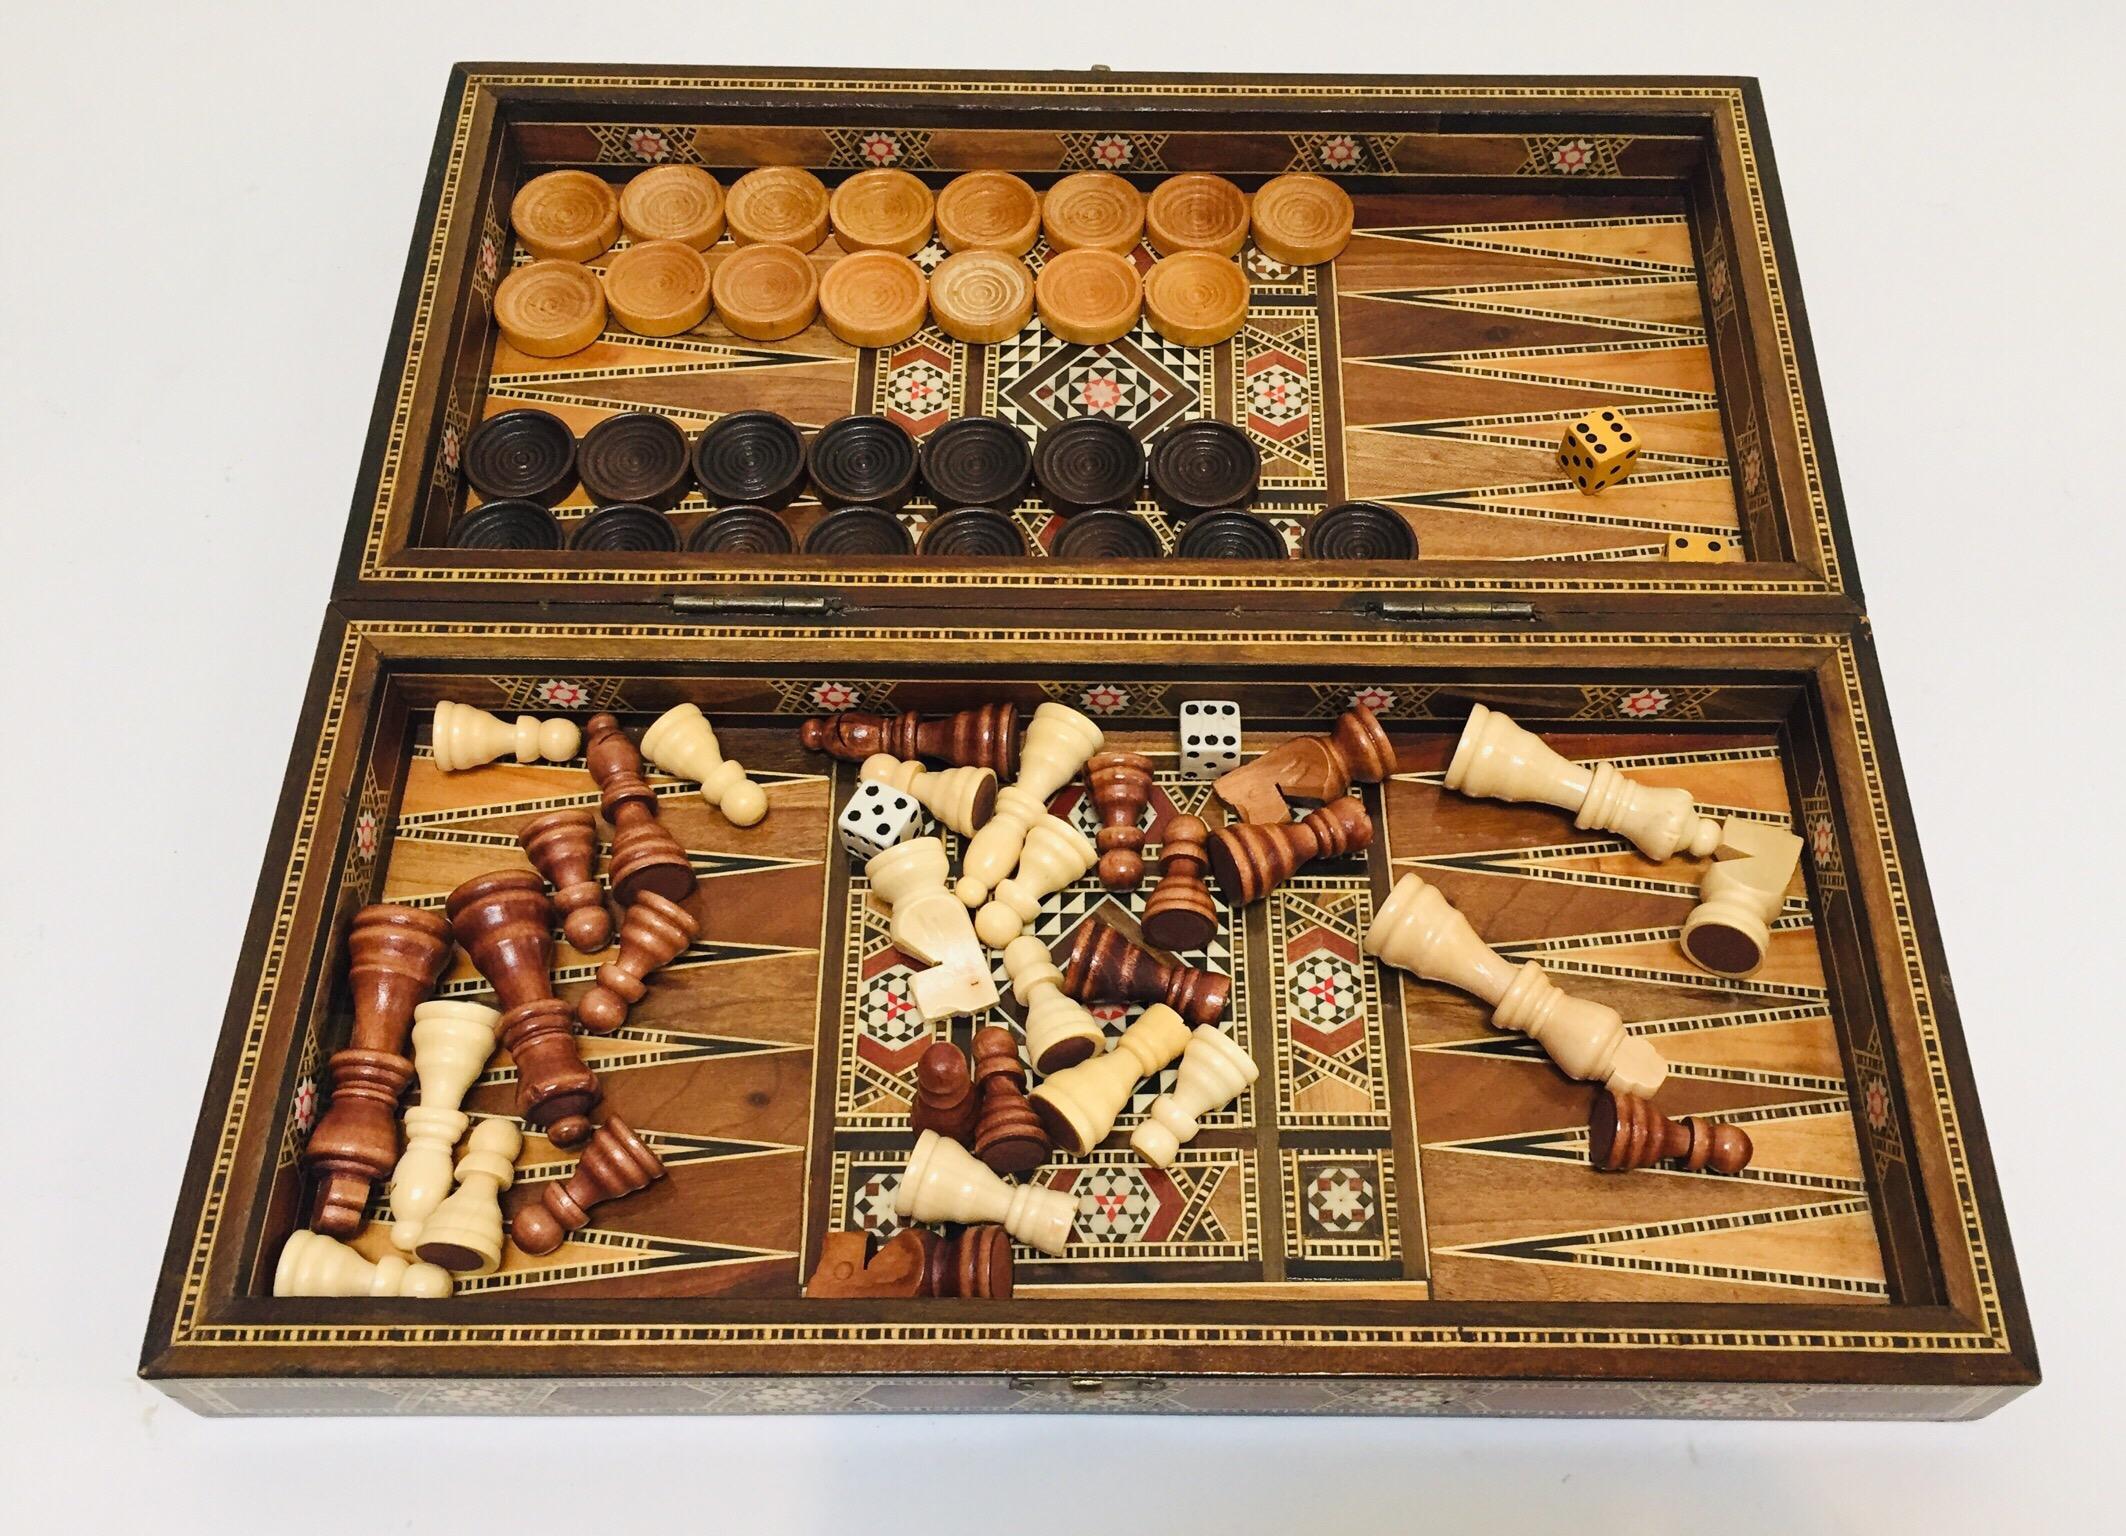 Large vintage midcentury Syrian inlaid with mother of pearl mosaic backgammon and chess game.
Great inlaid micro mosaic hinged marquetry game box features a chess and checker board on the exterior and backgammon board on the interior with all the